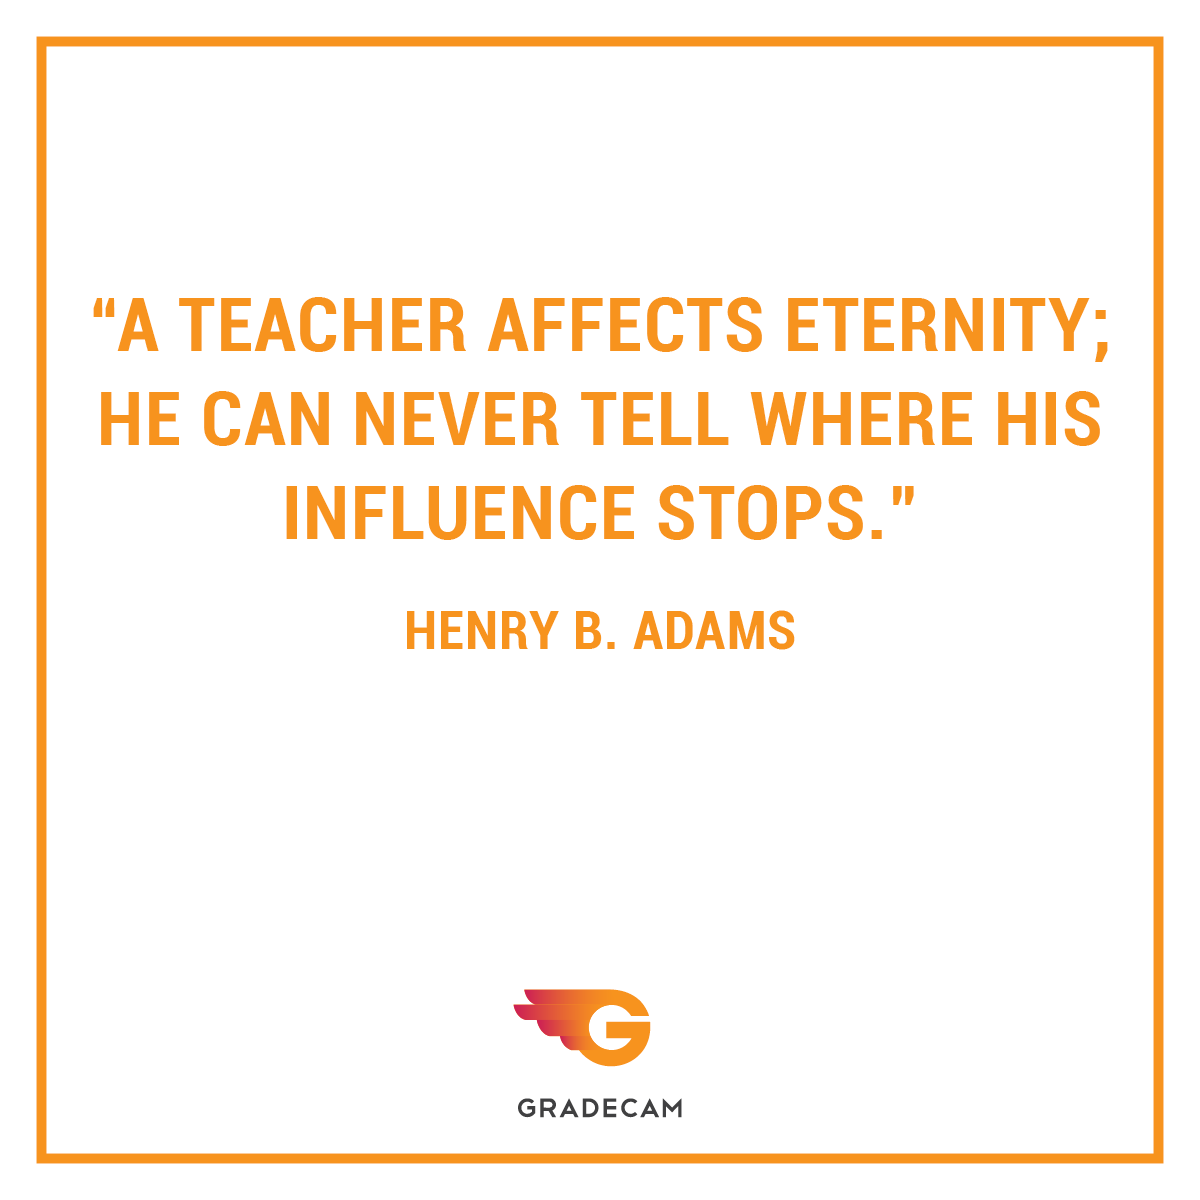 from famous people quotes about teachers